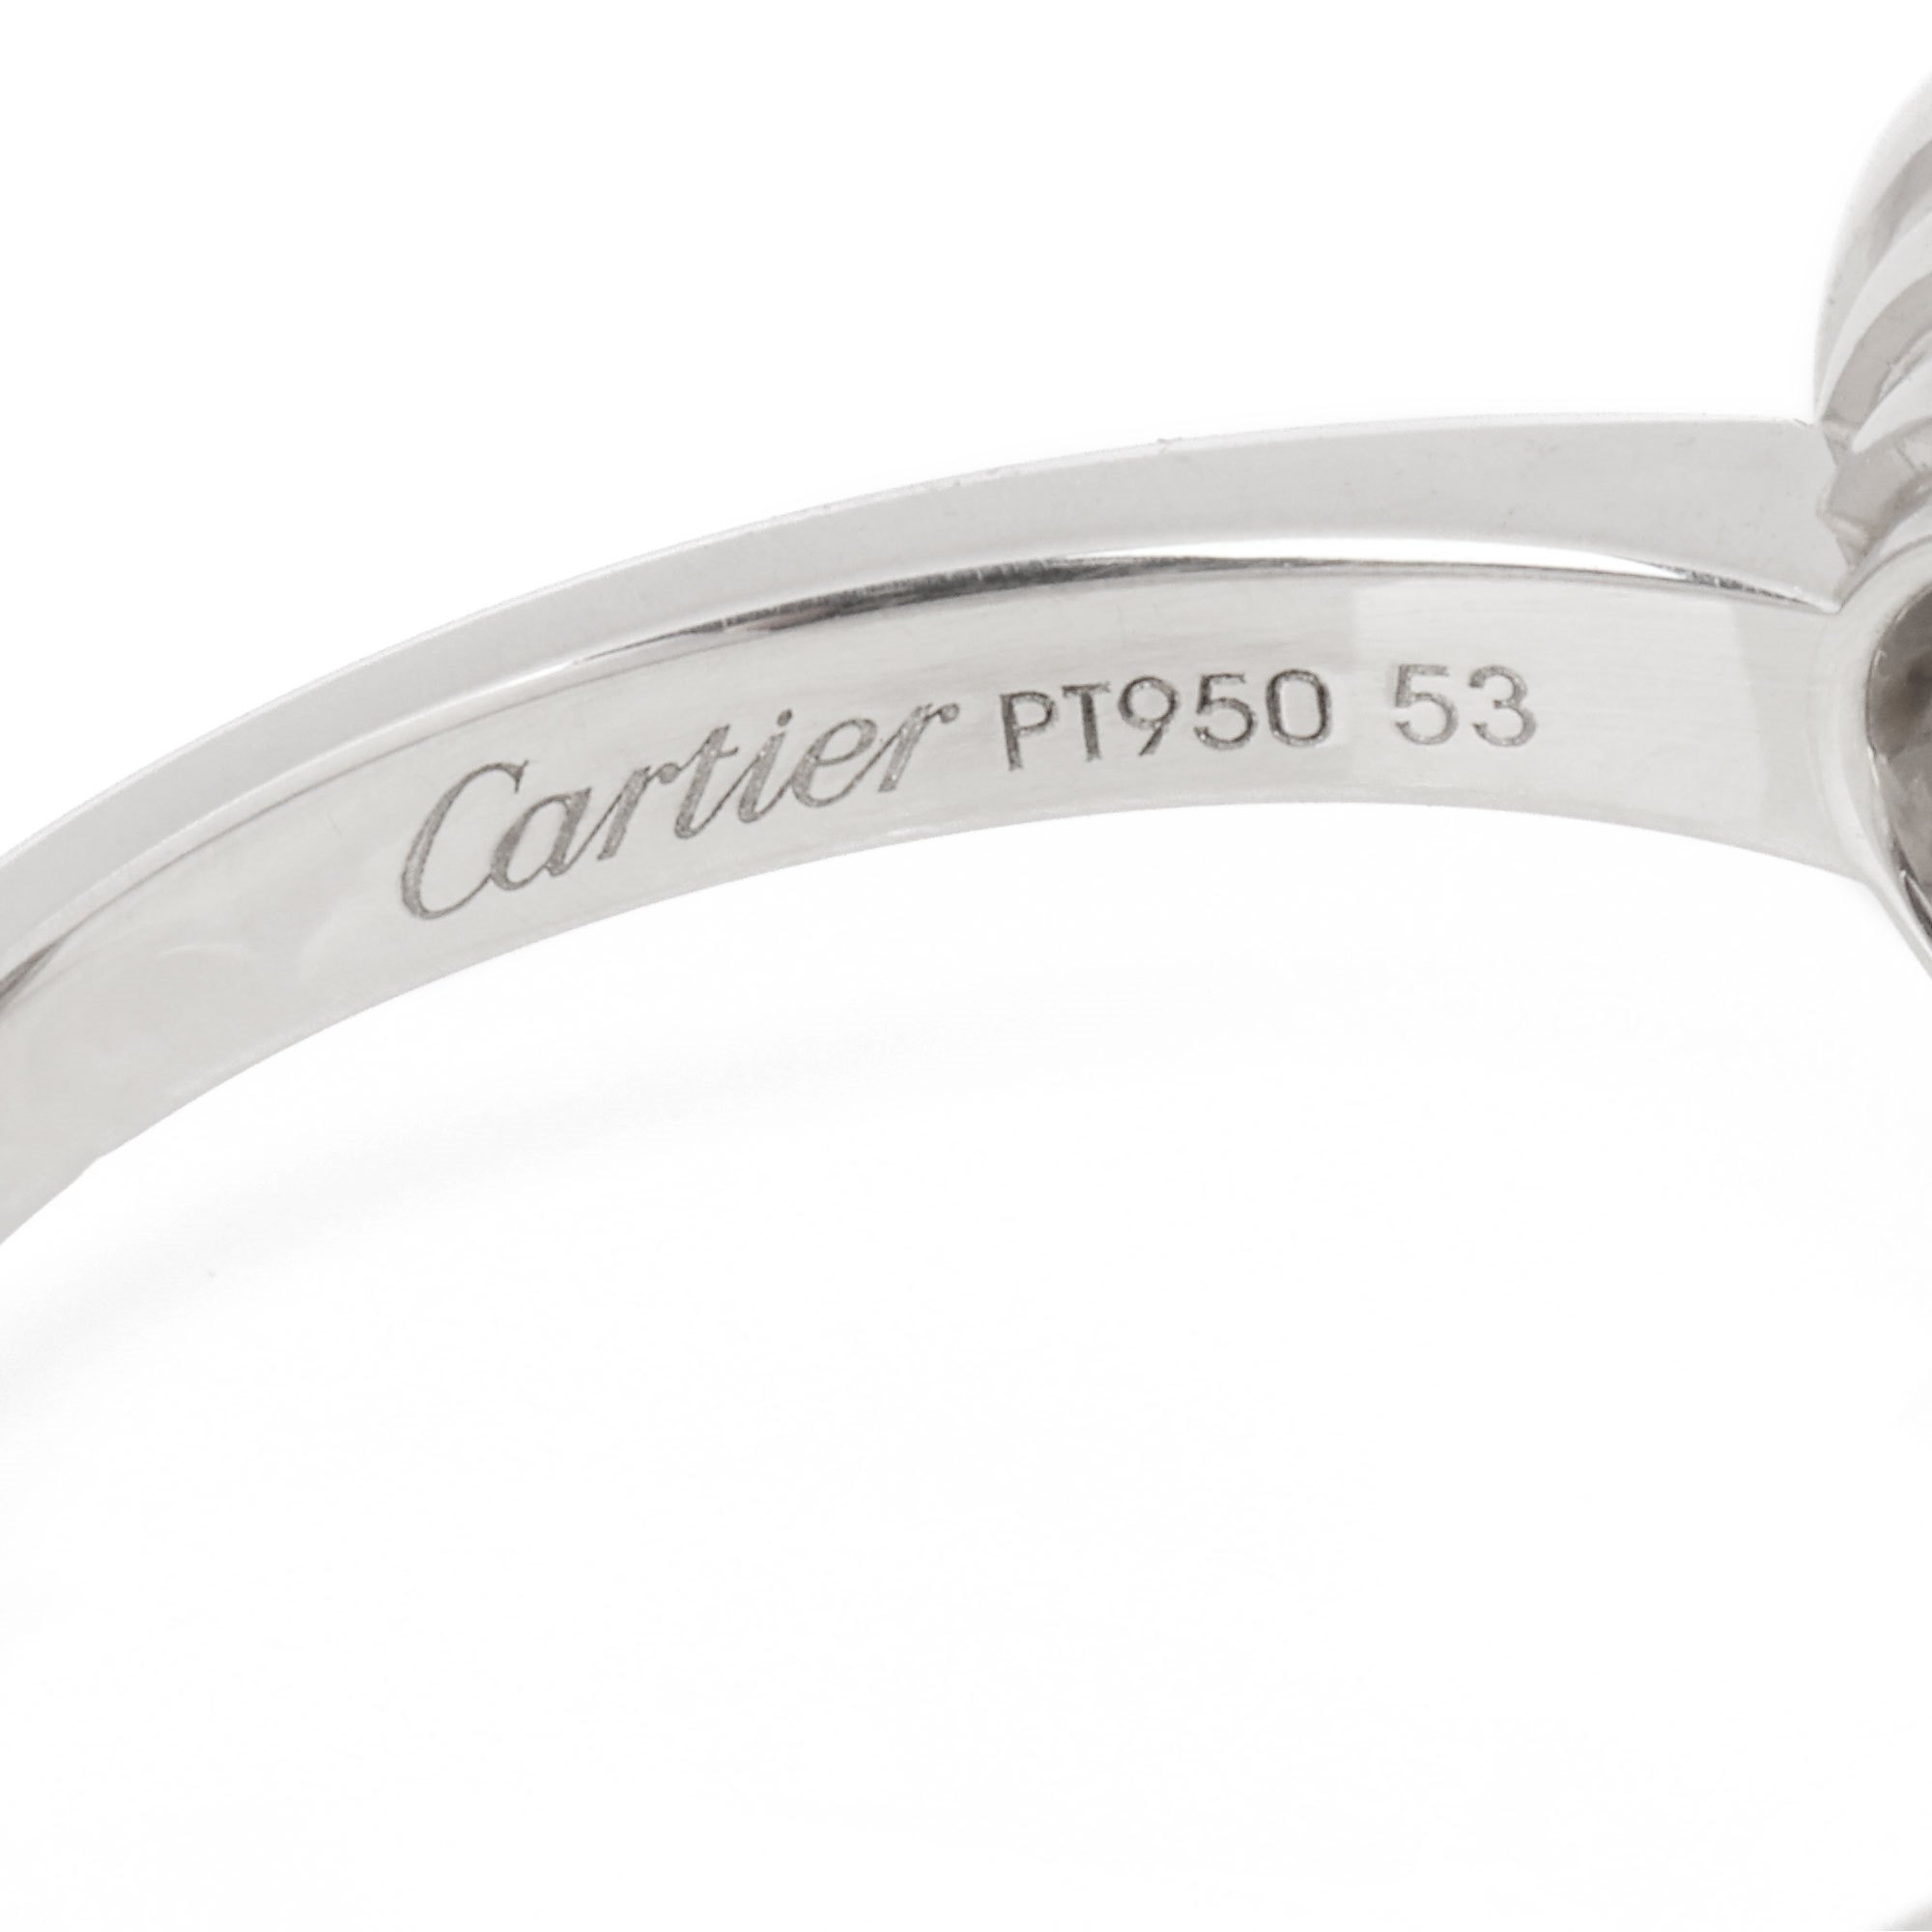 Cartier D'amour Diamond Halo Ring